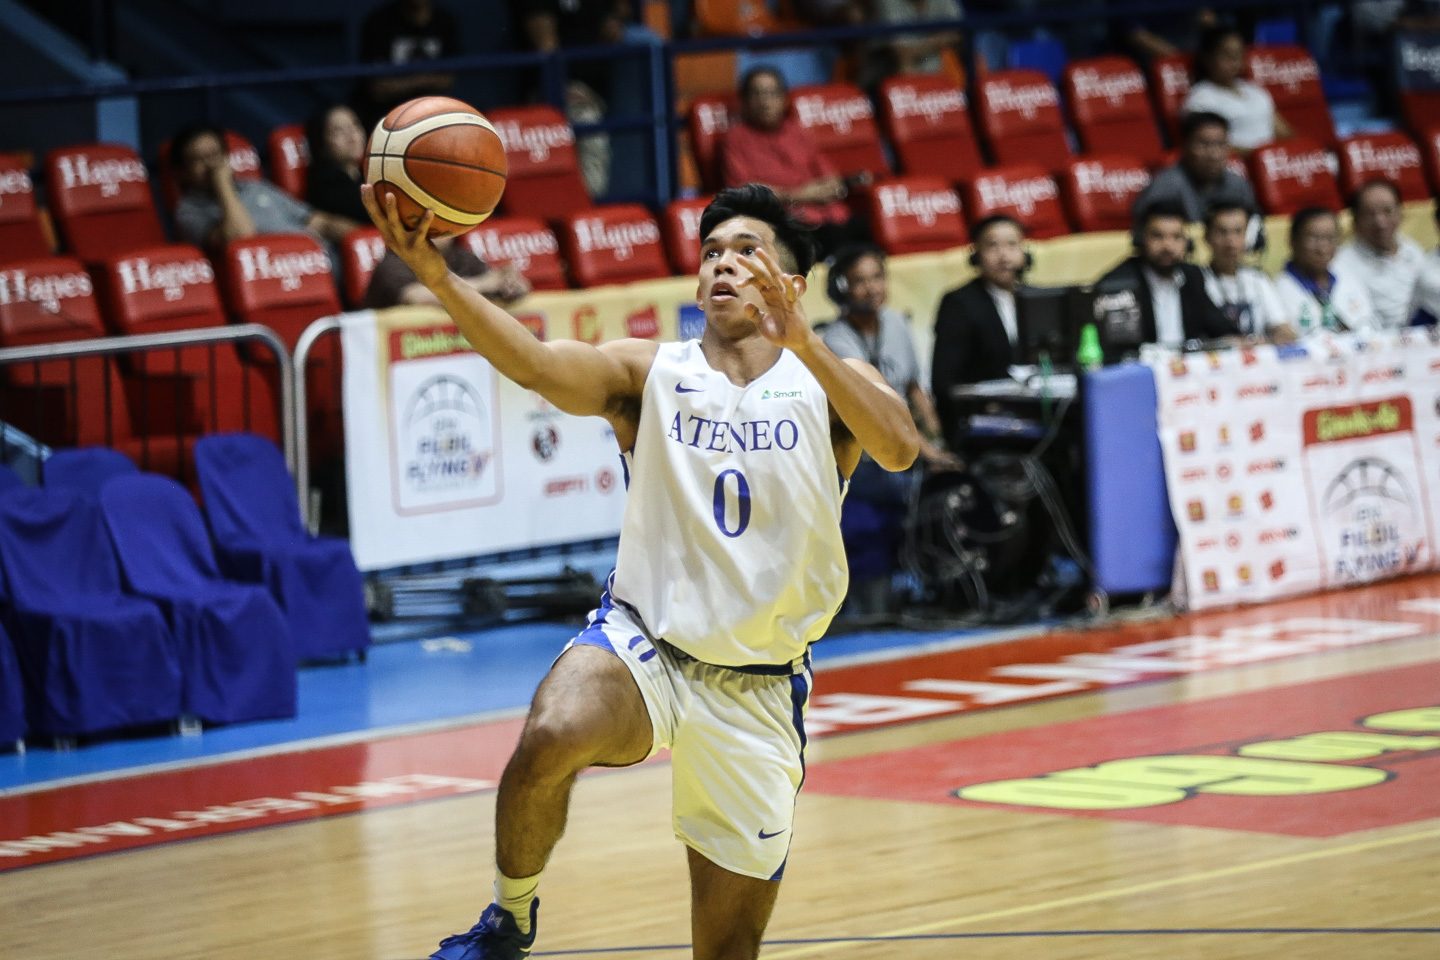 WATCH: Ateneo Blue Eagles remain grounded amid the hype